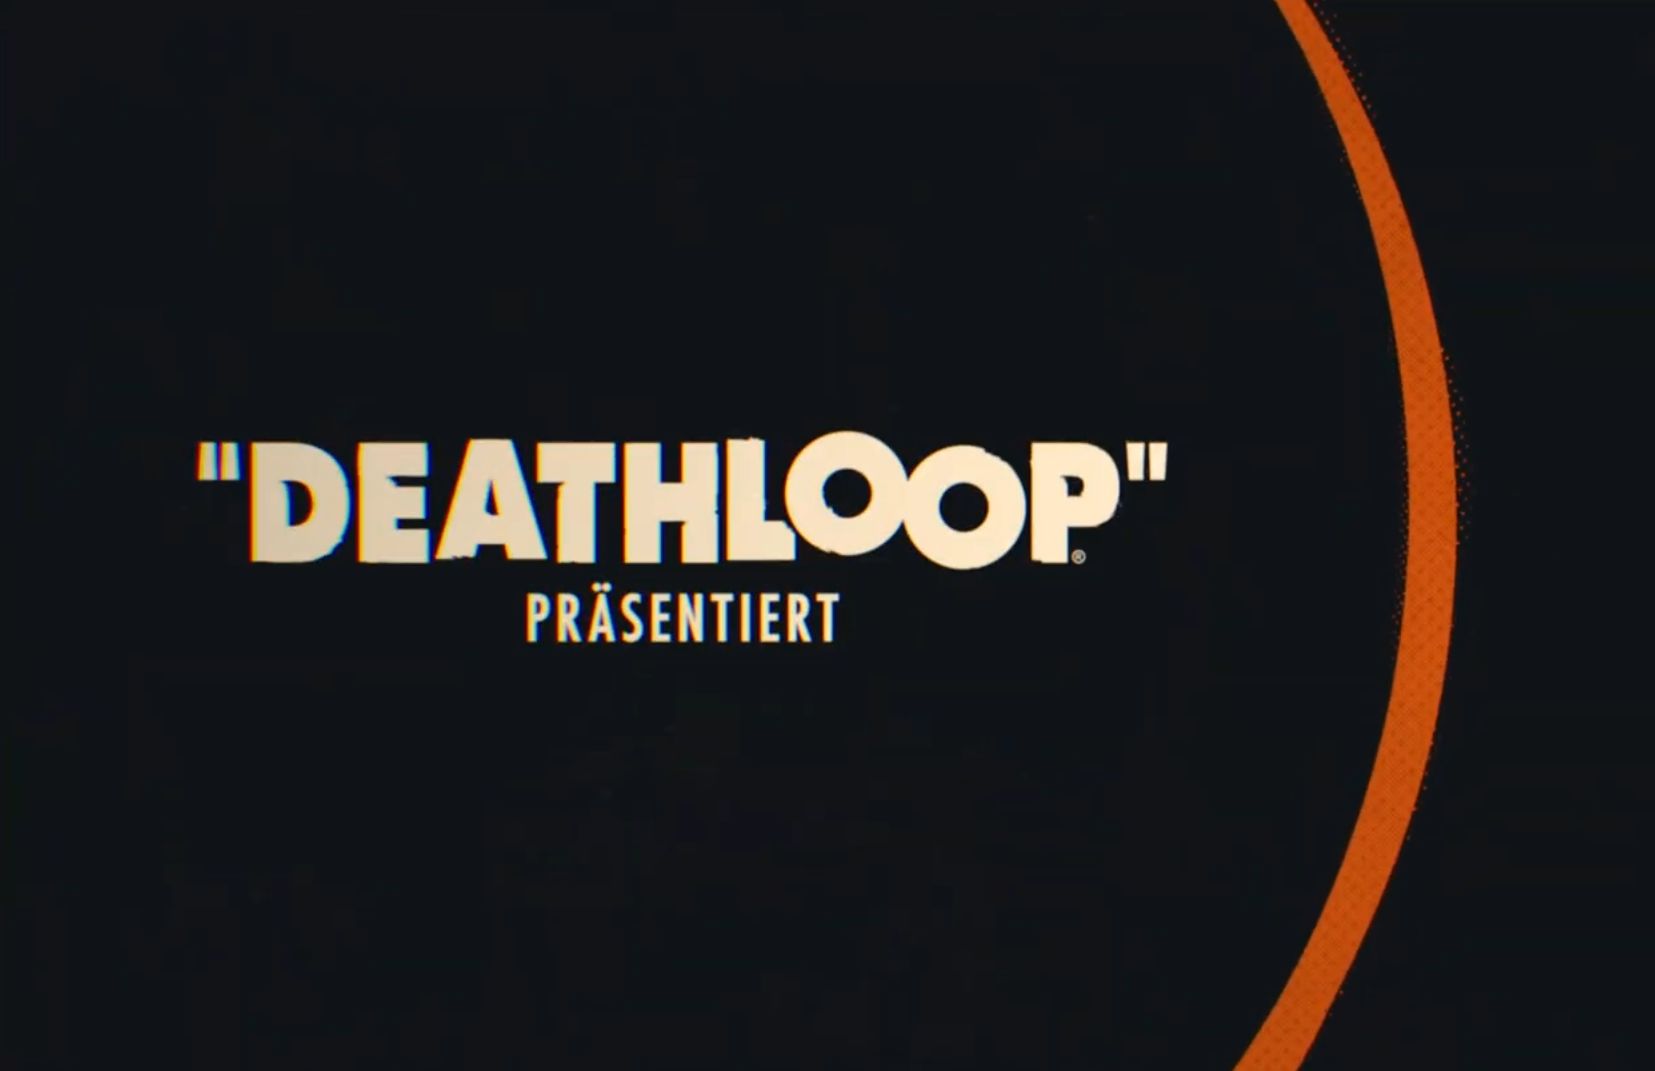 Deathloop: Fast-paced trailer for launch on Xbox and Game Pass